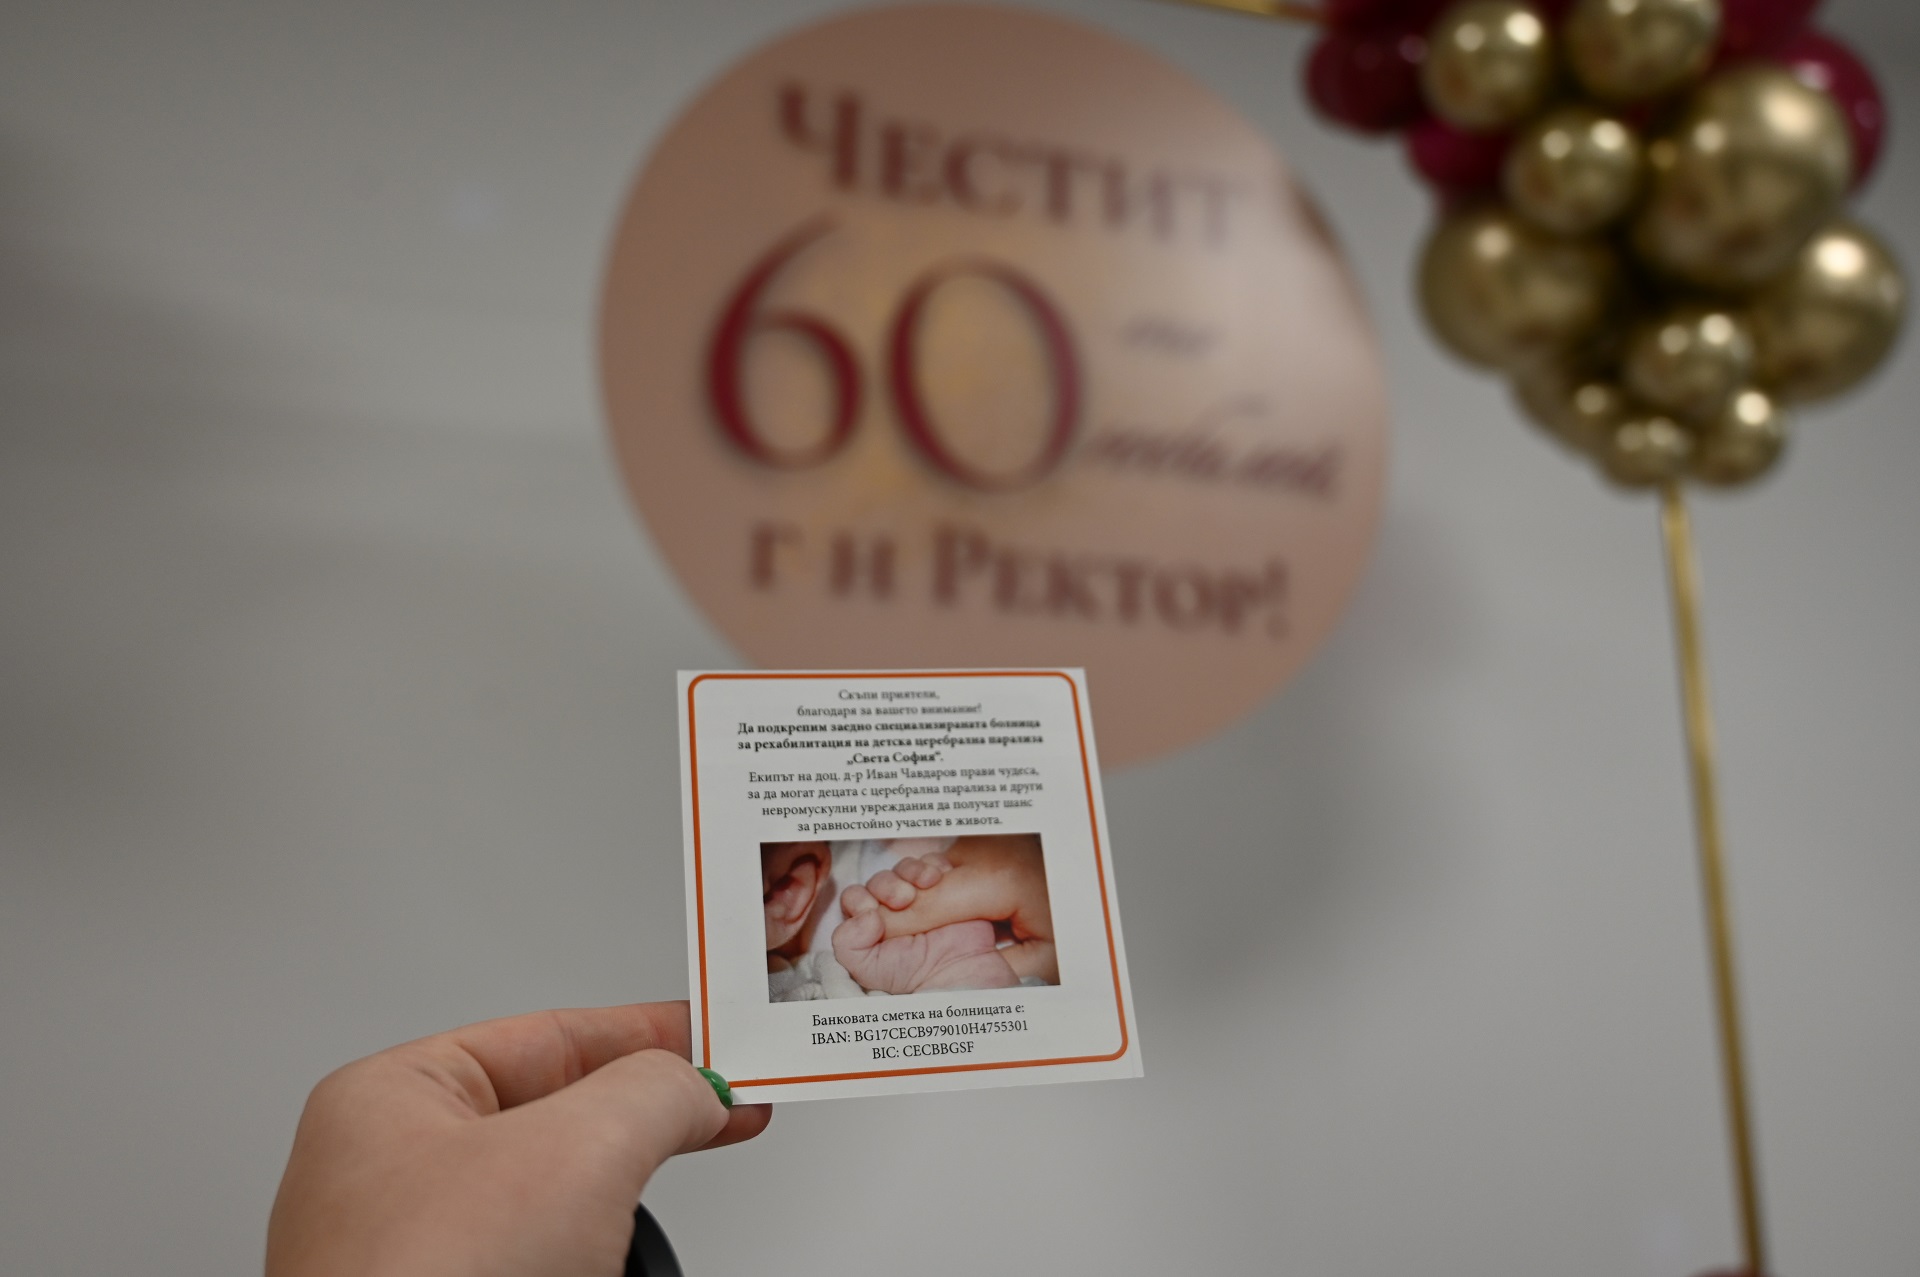 8 550 BGN are the funds raised through the donation initiative of the Rector of UNWE Prof. Dr. Dimitar Dimitrov on the occasion of his 60<sup>th</sup> Anniversary. Prof. Dimitrov invited his guests to participate in a charitable cause and donate the amount intended for gifts to the St. Sofia Specialized Rehabilitation Hospital for Children with Cerebral Palsy. Already during the party 7000 BGN were collected <i>/copy of the payment slip on the picture below/</i>. An additional 1,550 BGN were received to the hospital's account - it was announced by the Accounting Department of the Specialized Hospital.